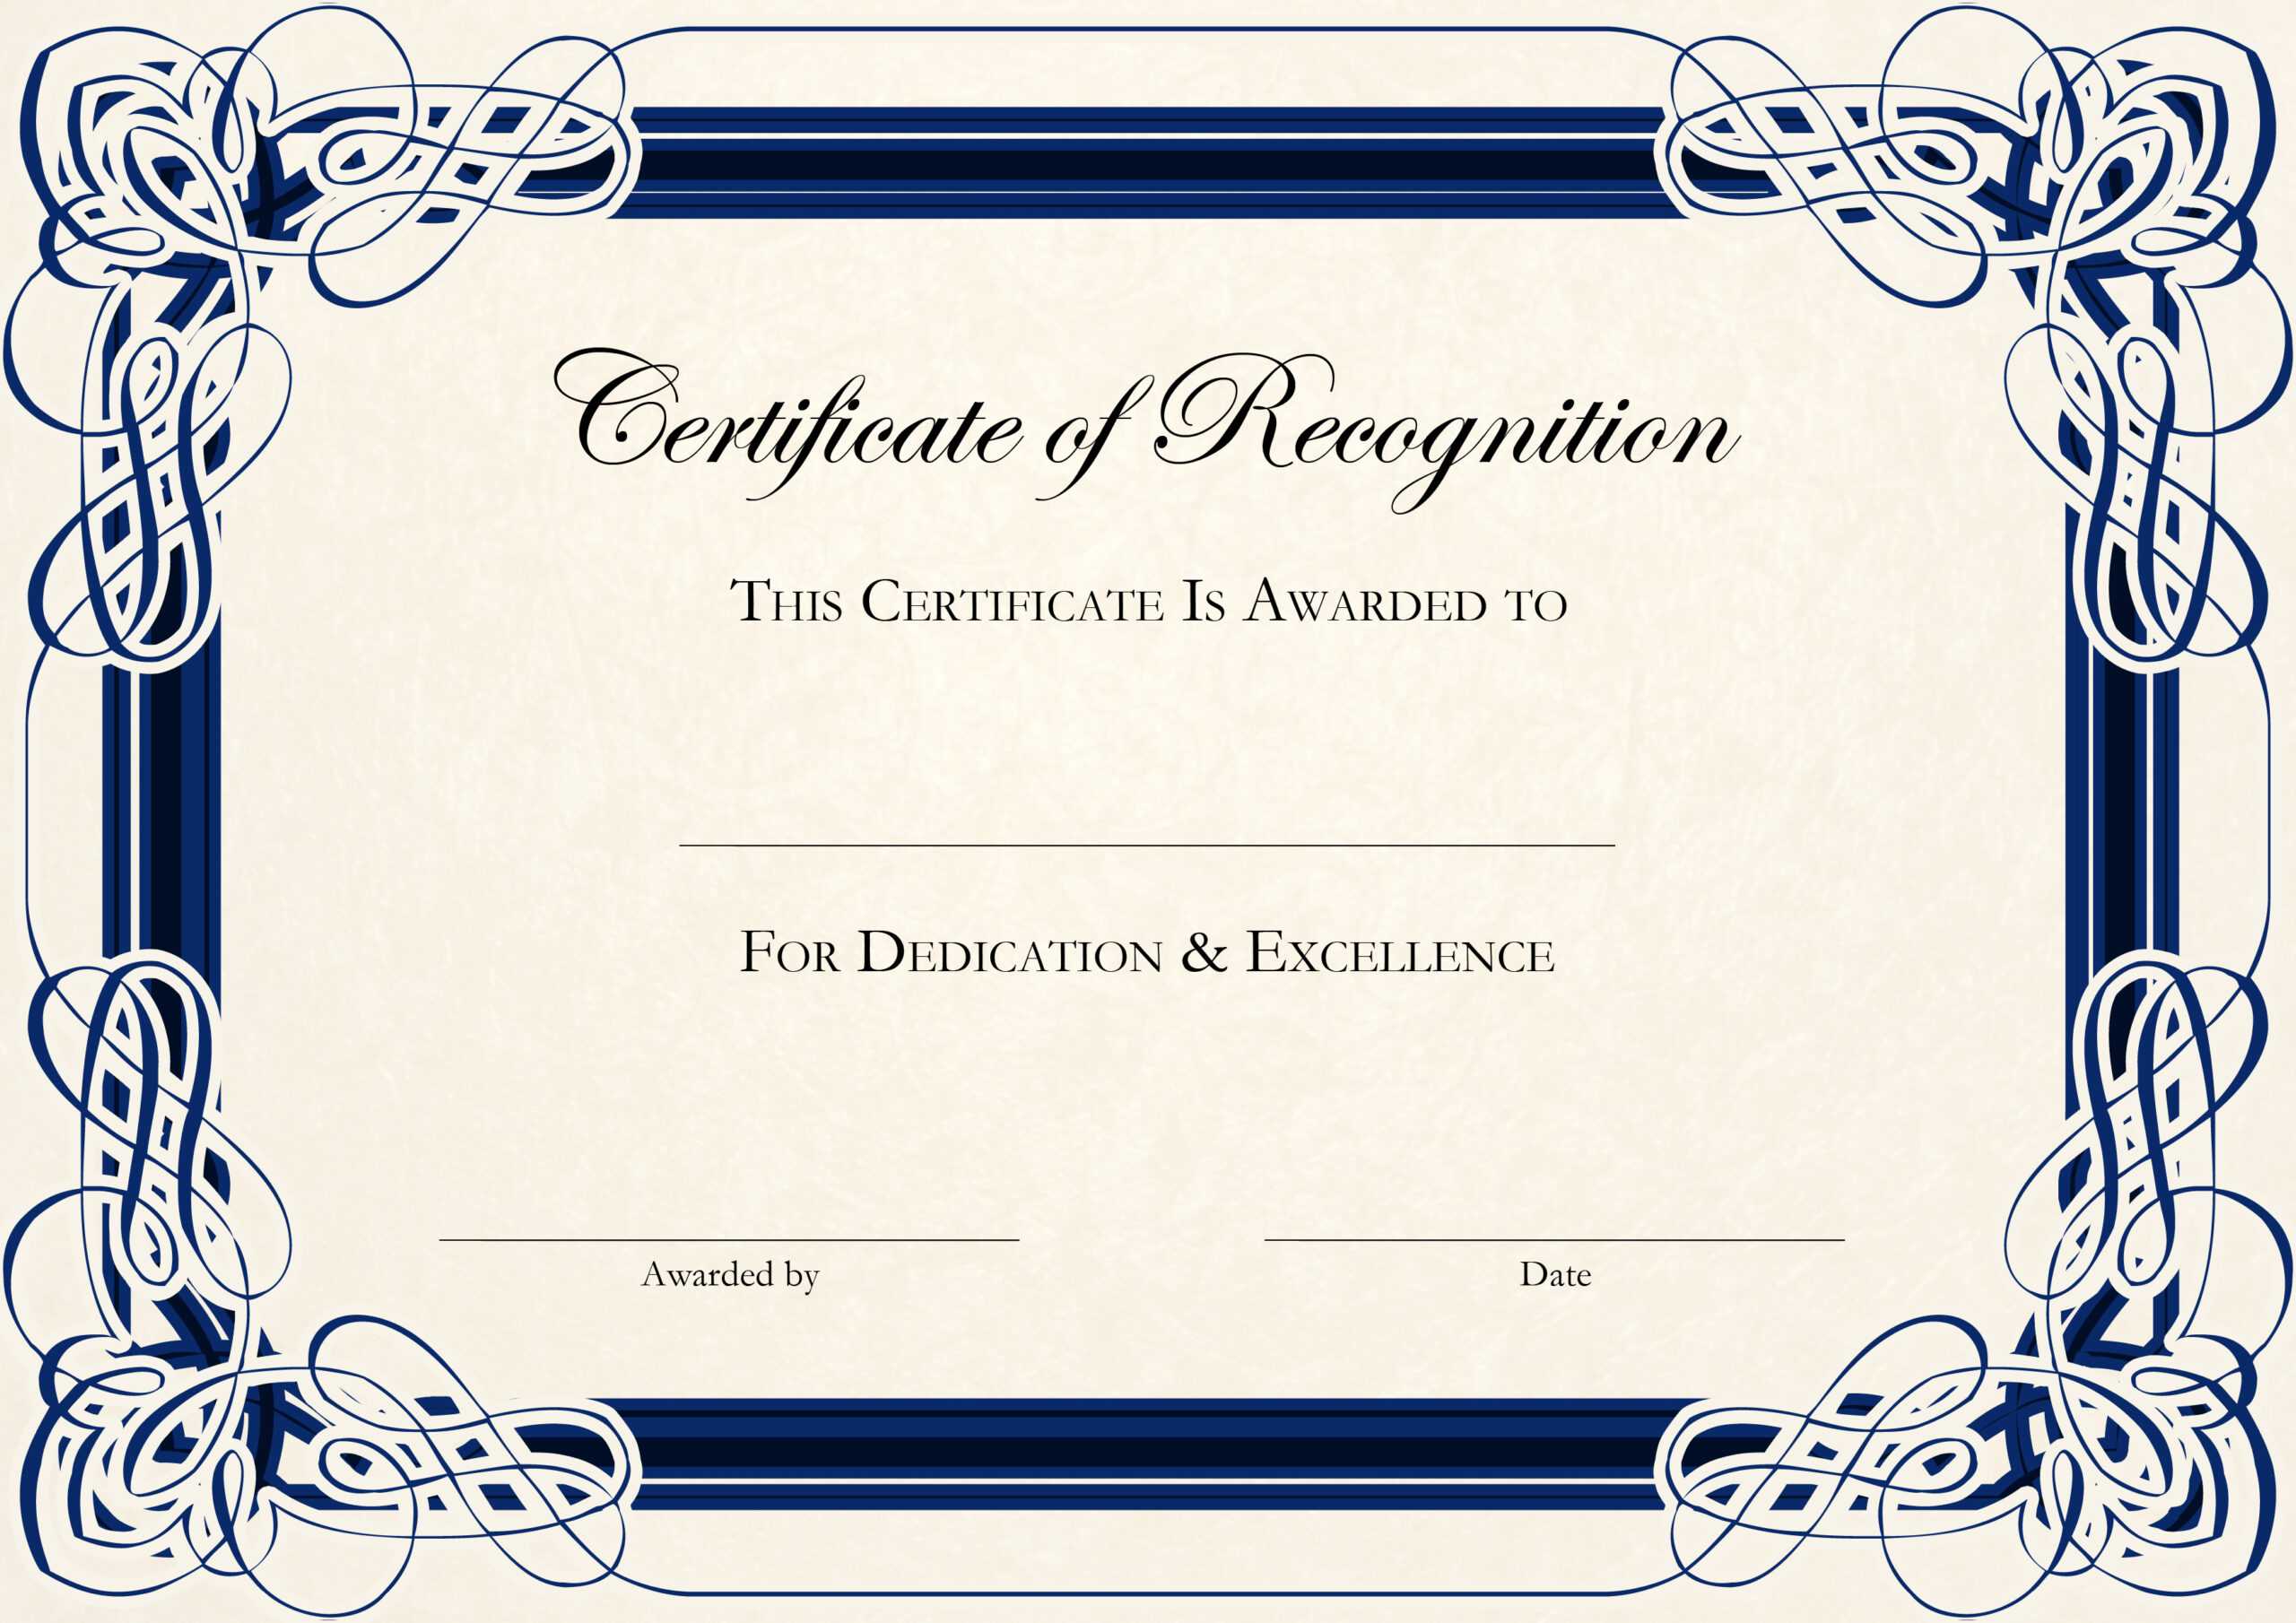 A4 Paper Formal Certificate Of Recognition Template Design In Employee Recognition Certificates Templates Free